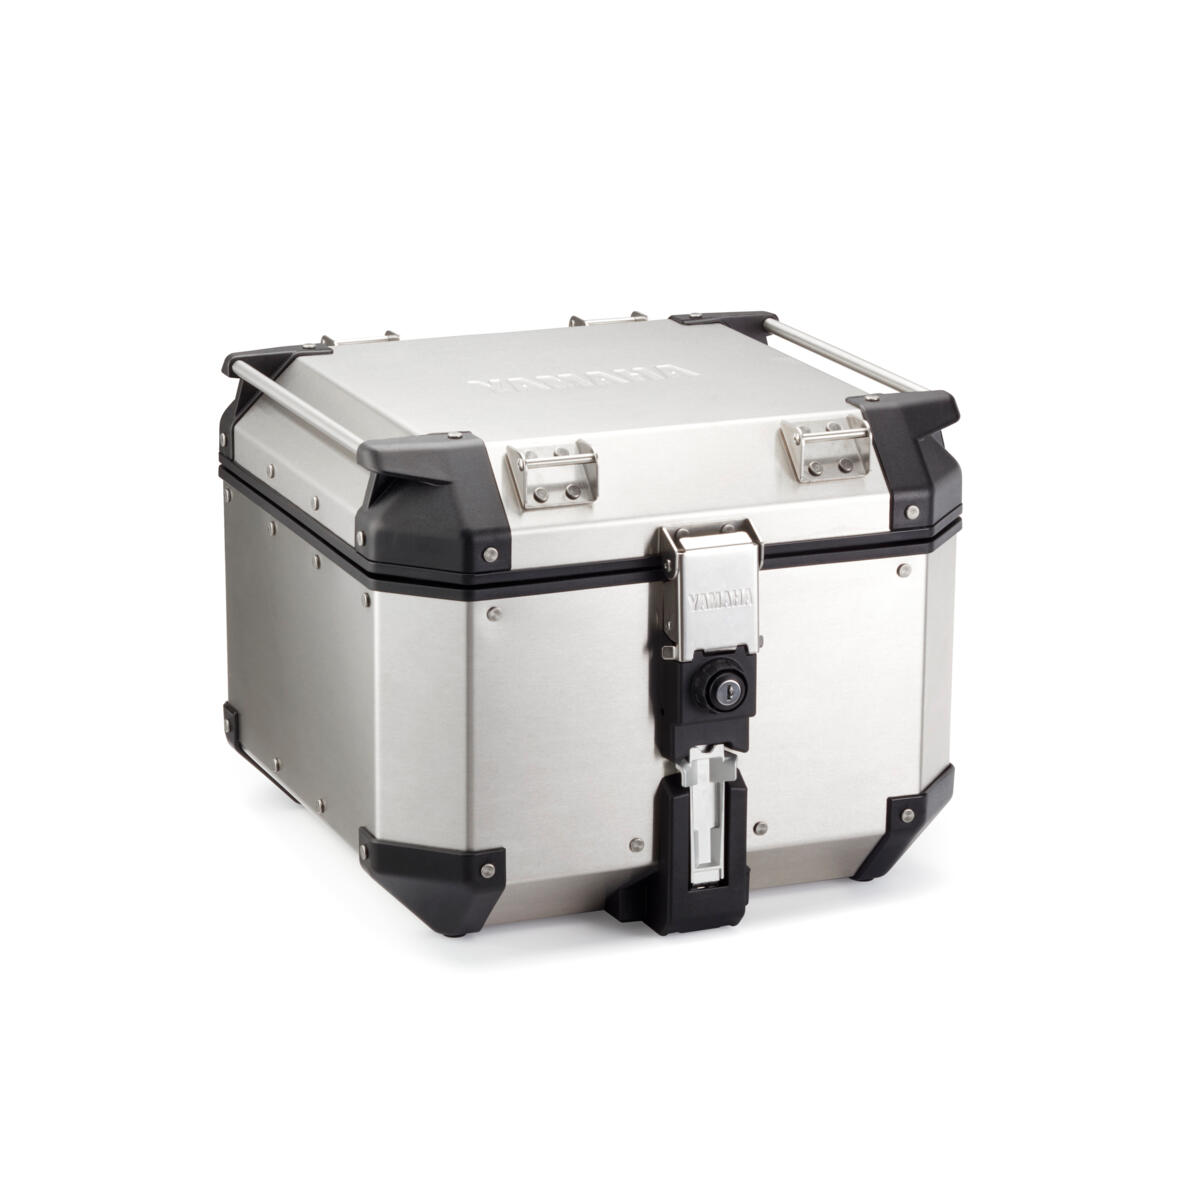 Top case with 42L loading capacity.